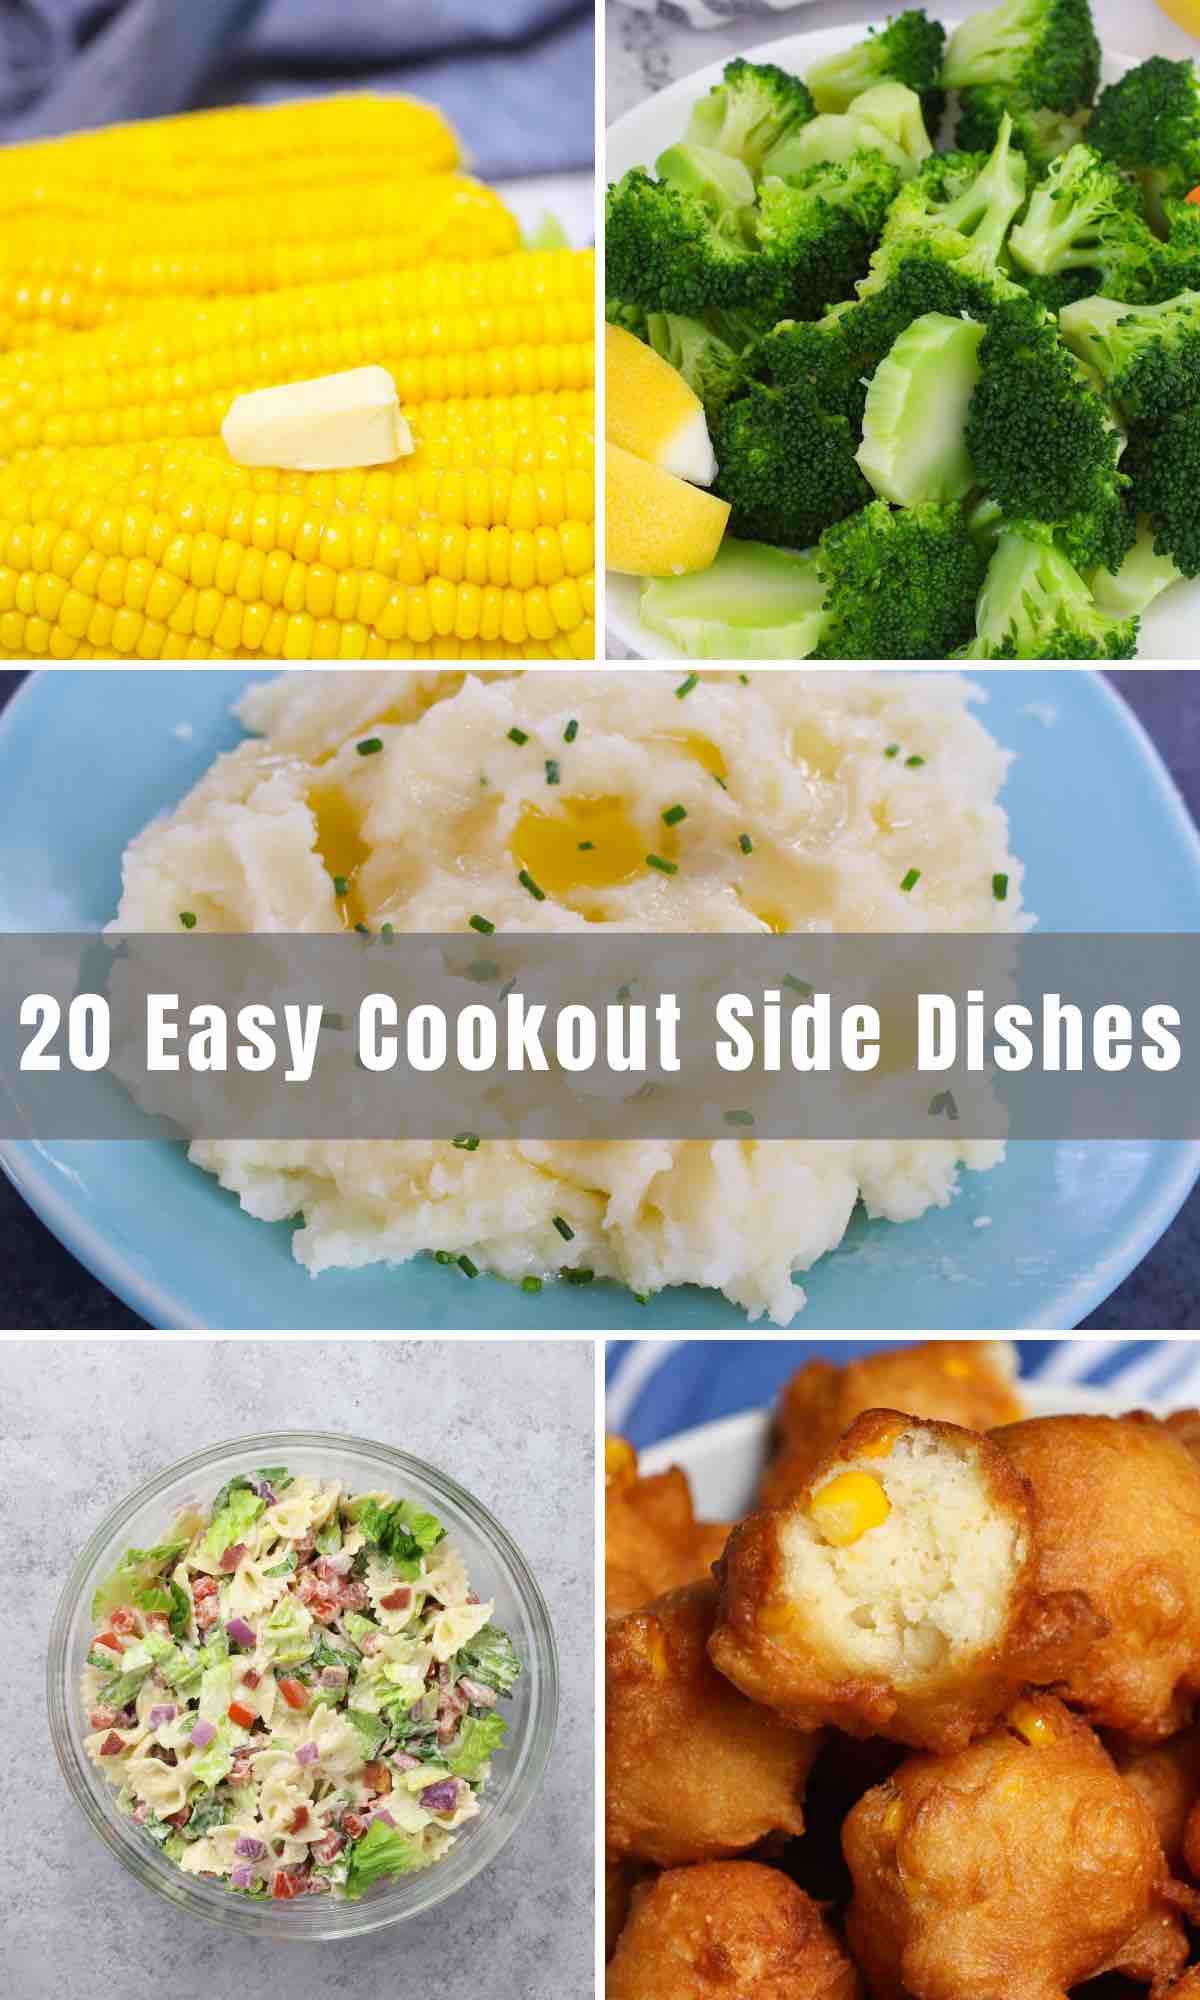 Is there anything better than the smell of freshly BBQ'd hamburgers and hotdogs? Summer cookouts are full of enjoyable moments, great memories, and delicious food! Below you will find 20 Easy Cookout Side Dishes to bring to your next gathering and feed as many people as you'd like!